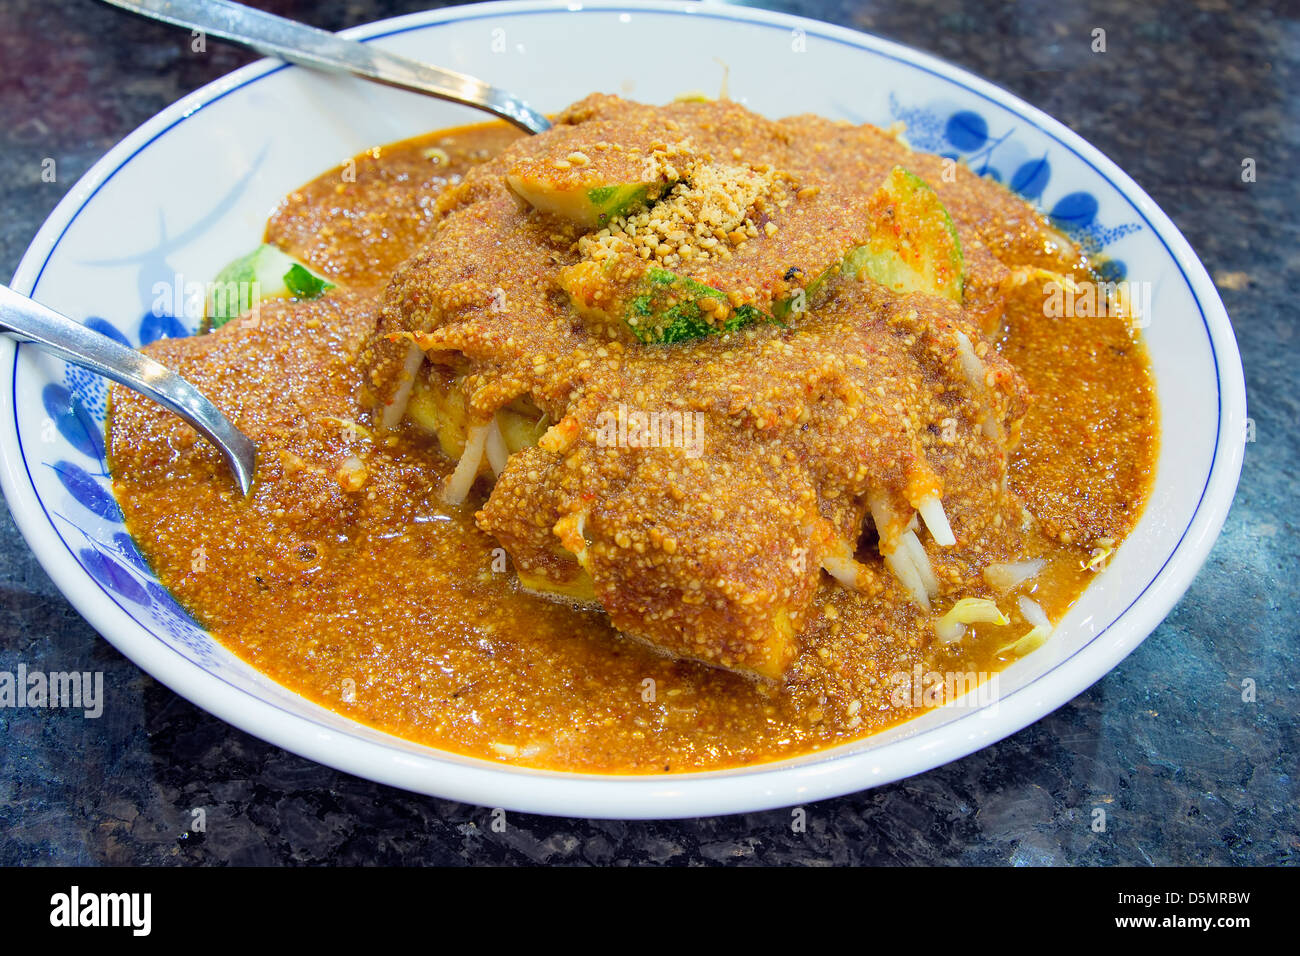 Malay Tauhu Goreng Fried Tofu Dish with Cucumbers Bean Sprouts Covered with Peanut Gravy Sauce Closeup Stock Photo